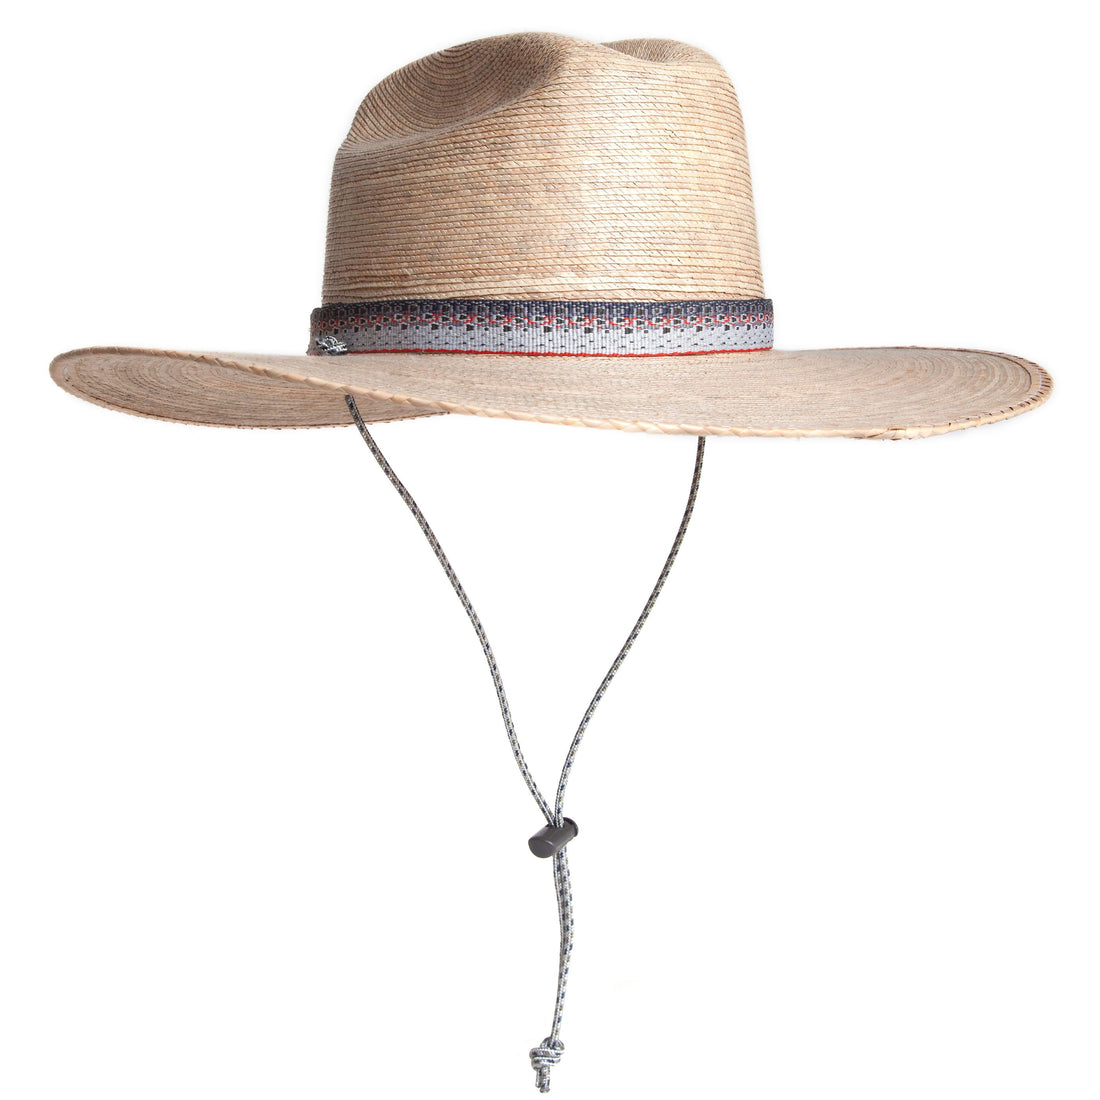 Fishpond - Lowcountry Hat